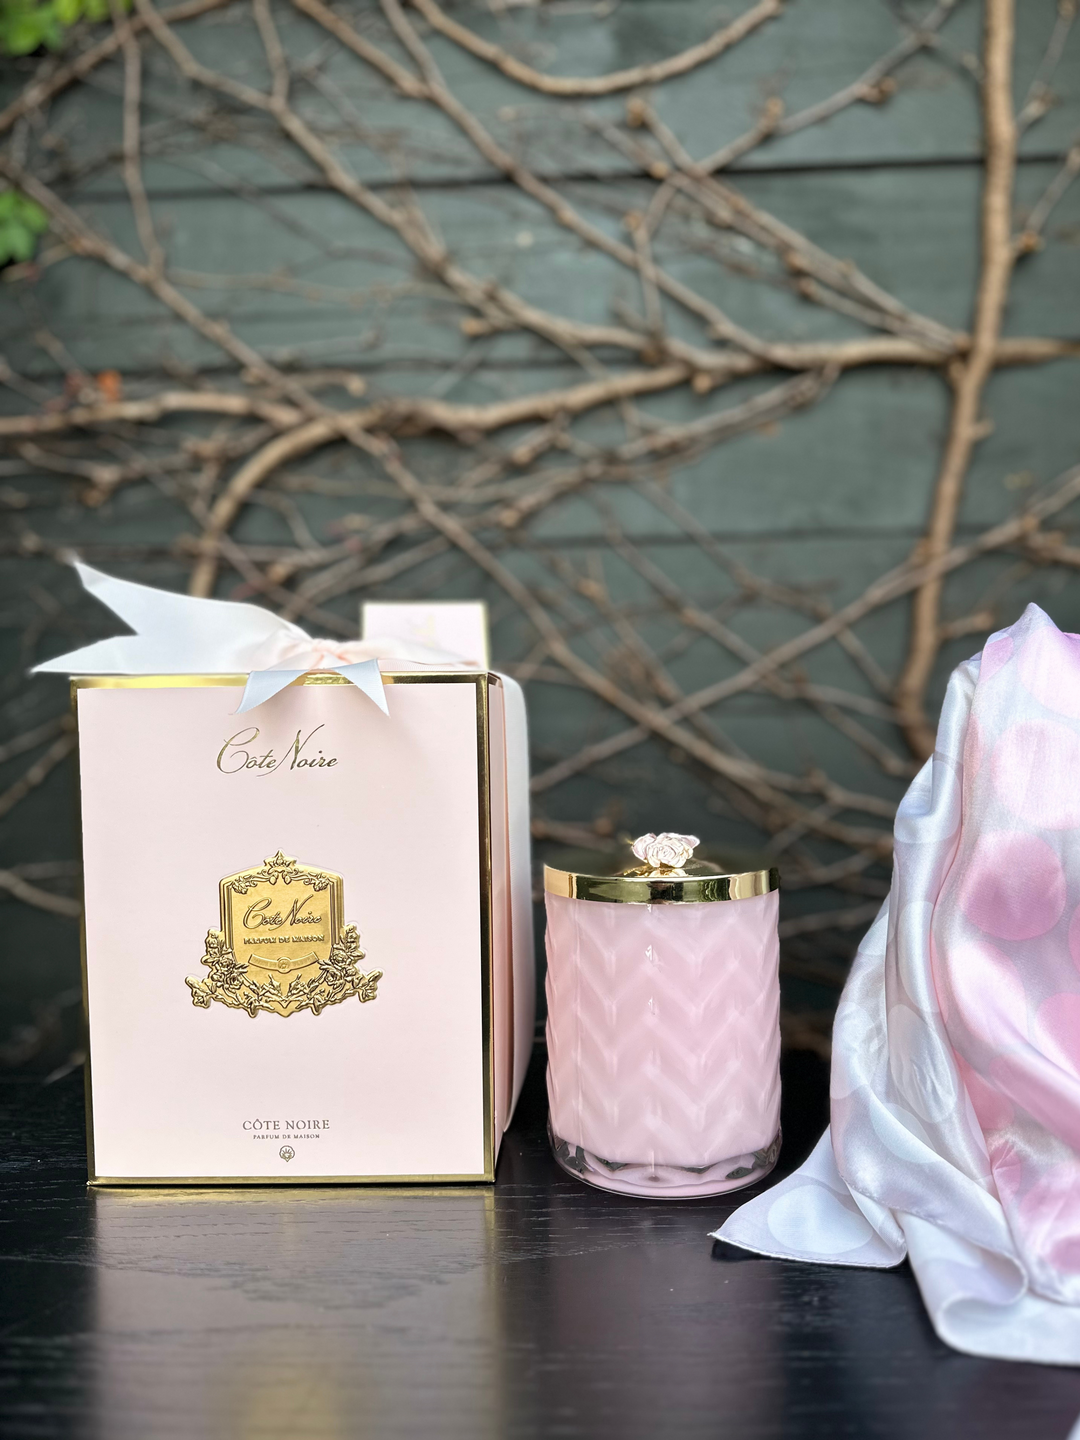 Côte Noire Herringbone Charente Rose Candle and Scarf